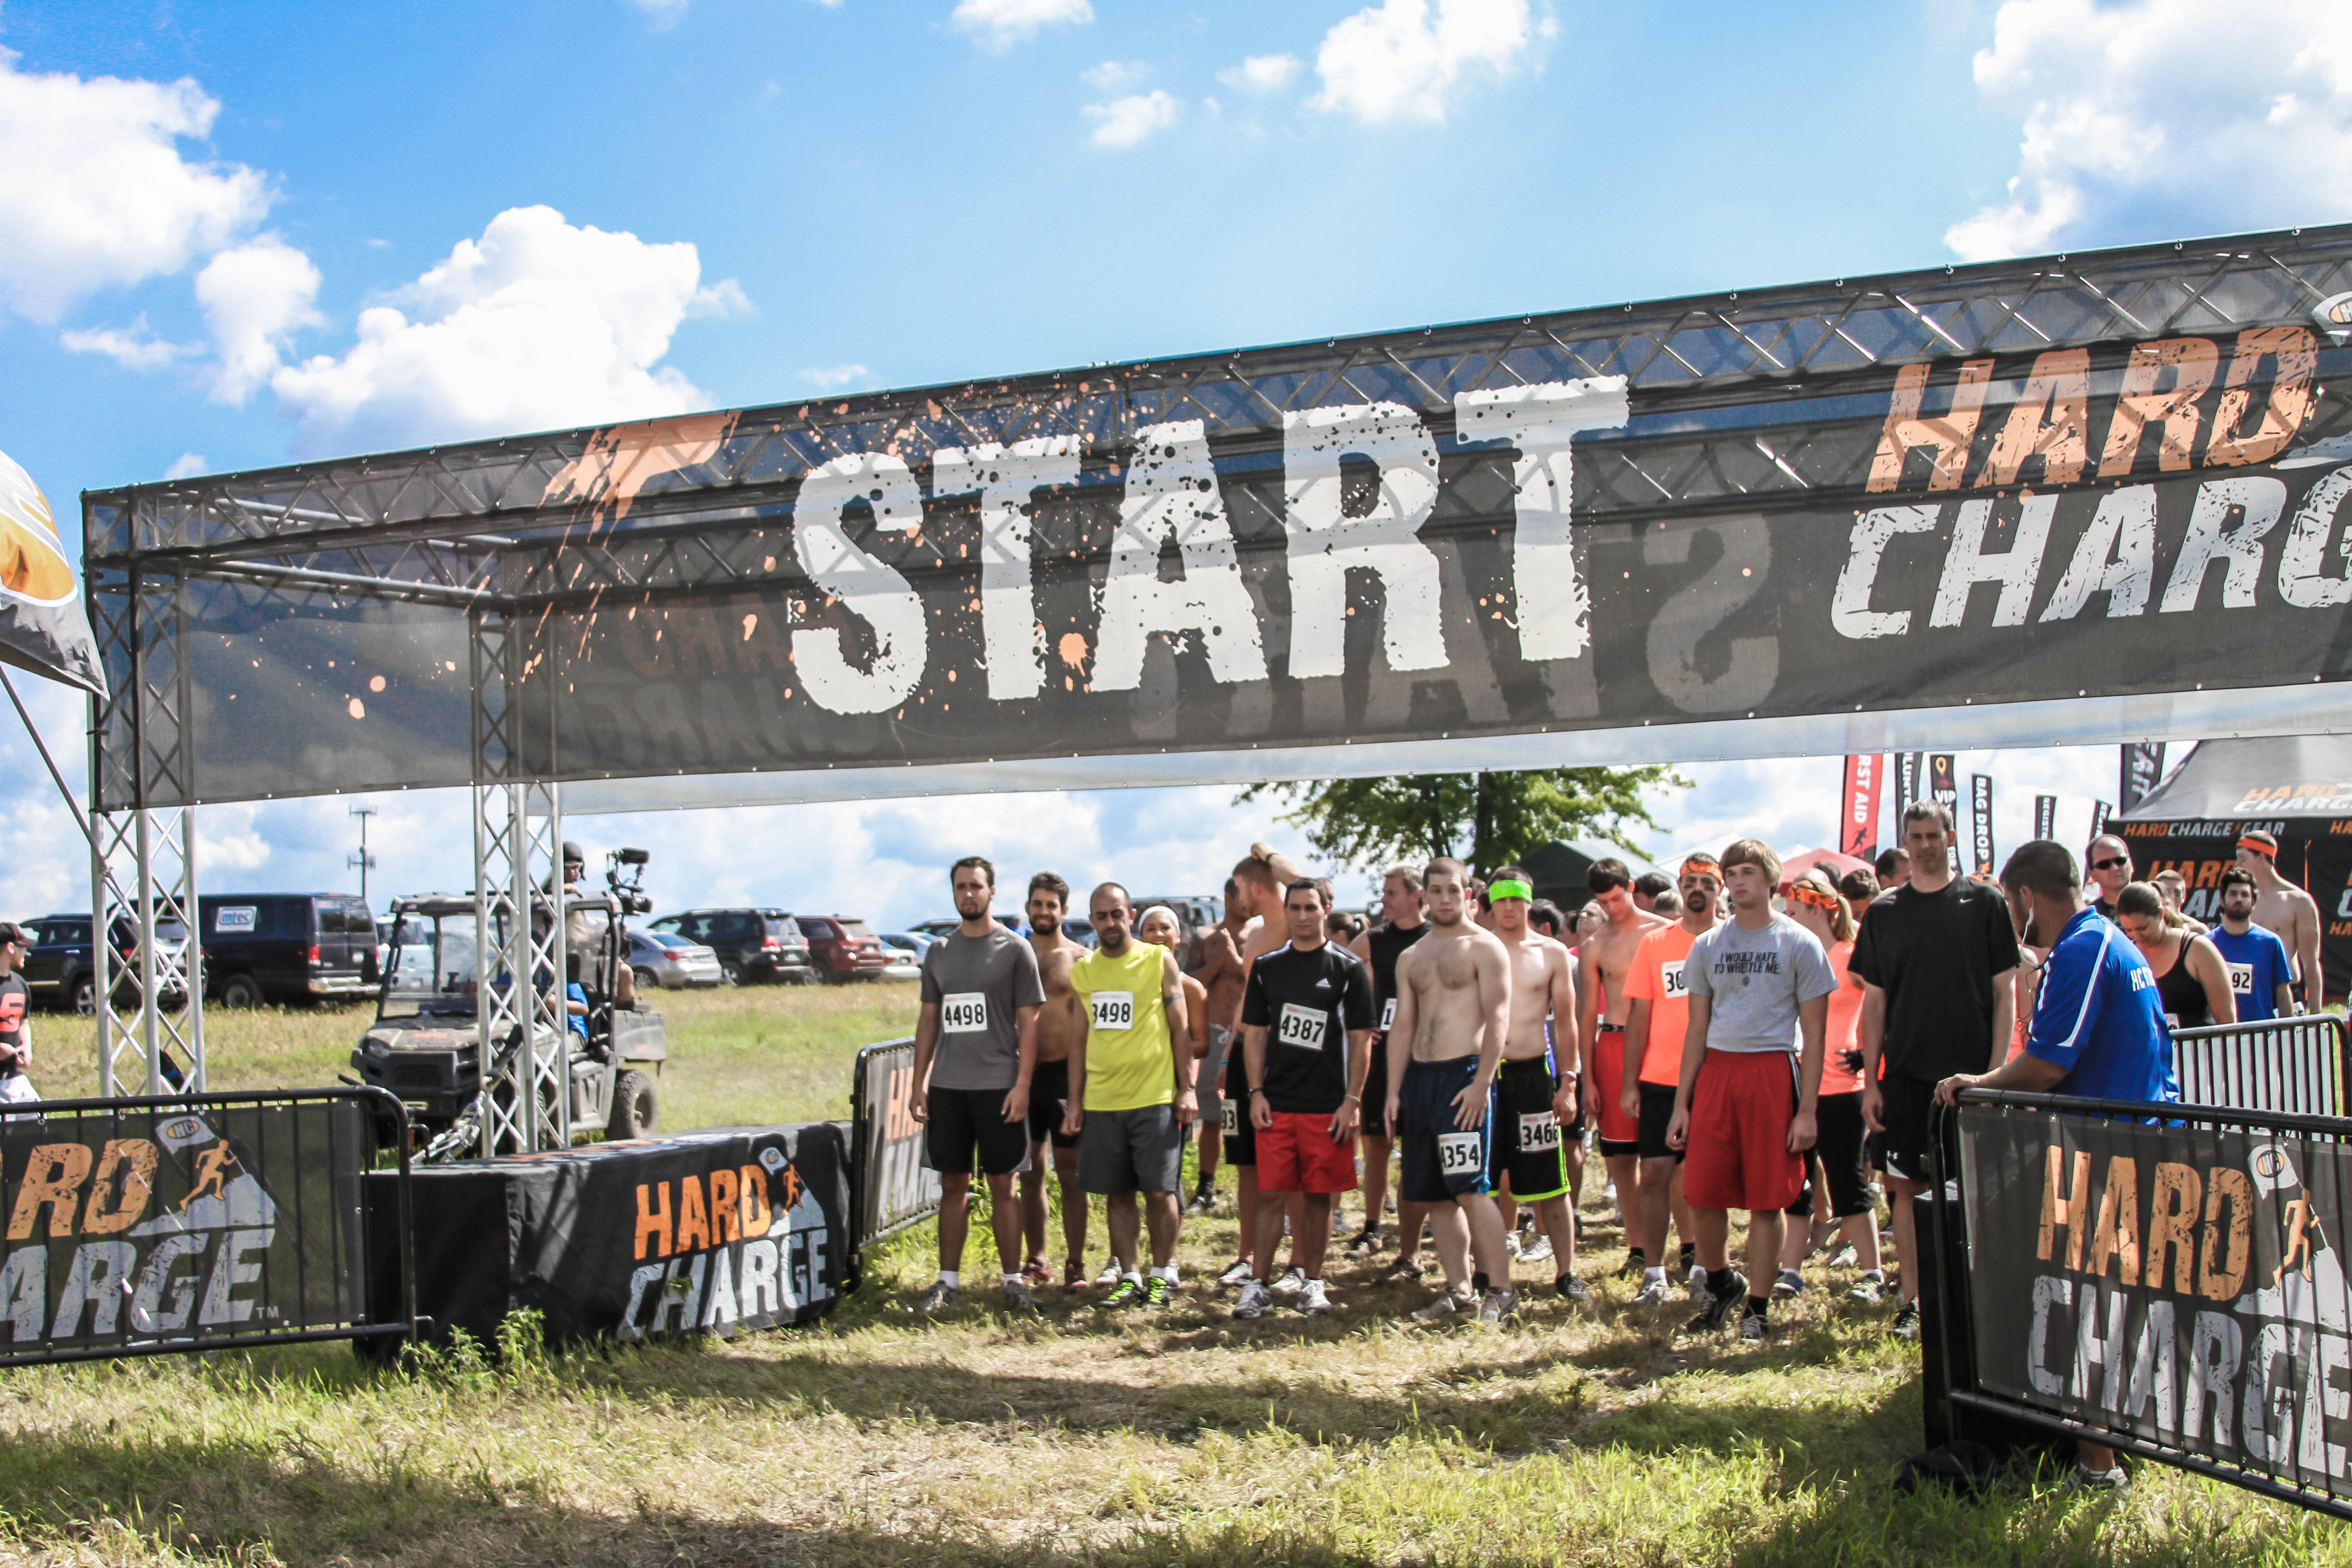 Hard Charge Chicago/Milwaukee Televised Obstacle Race